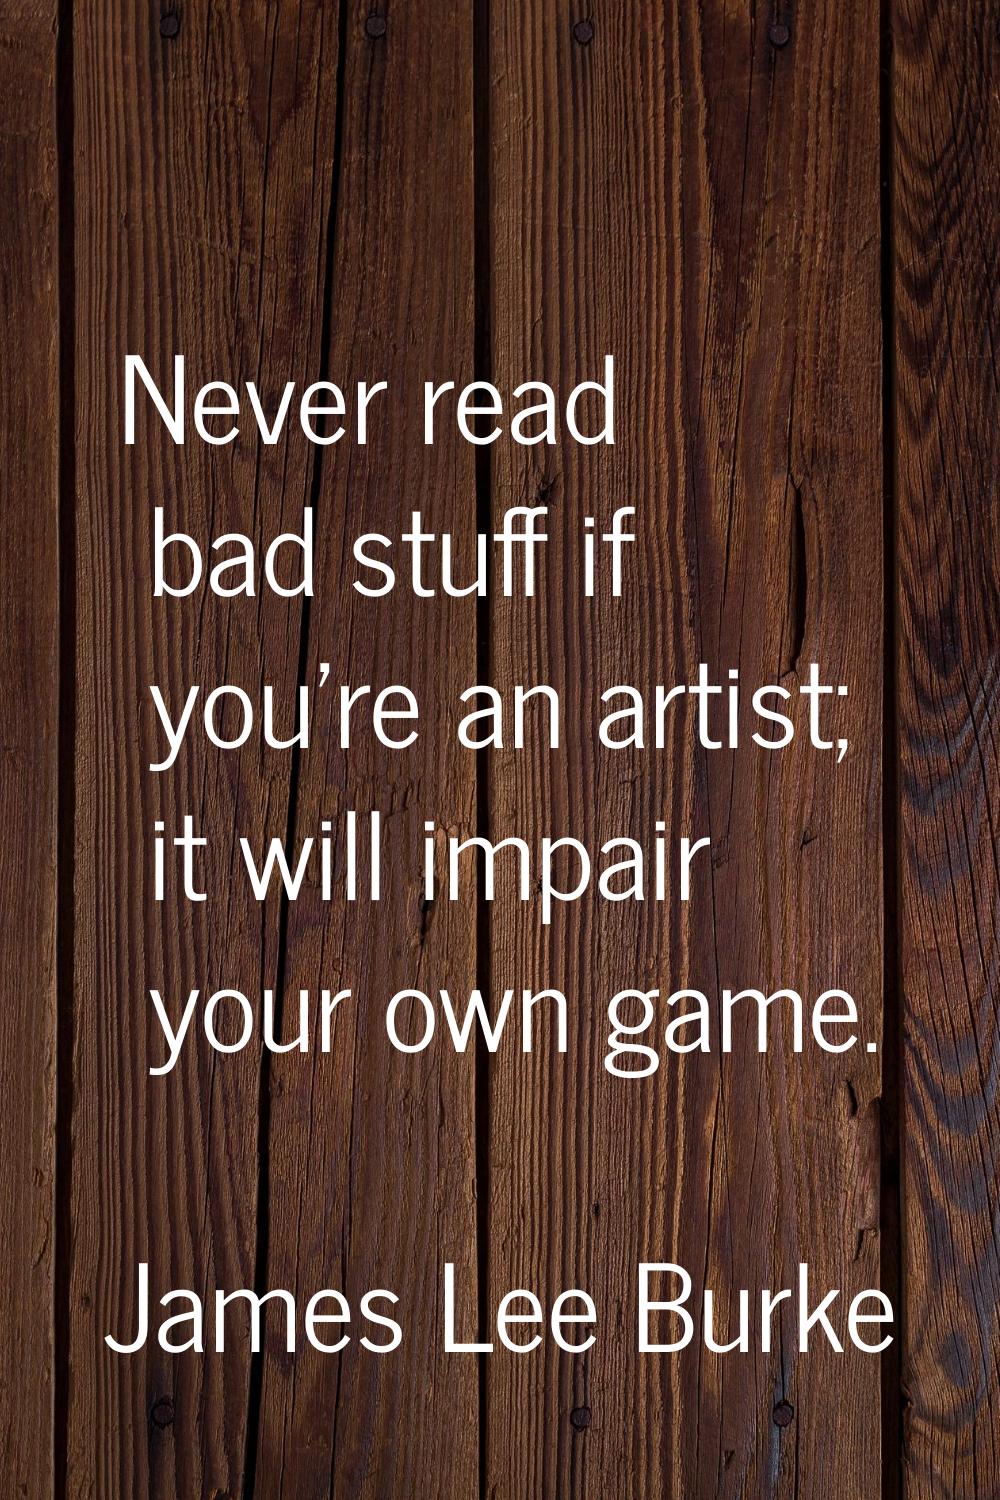 Never read bad stuff if you're an artist; it will impair your own game.